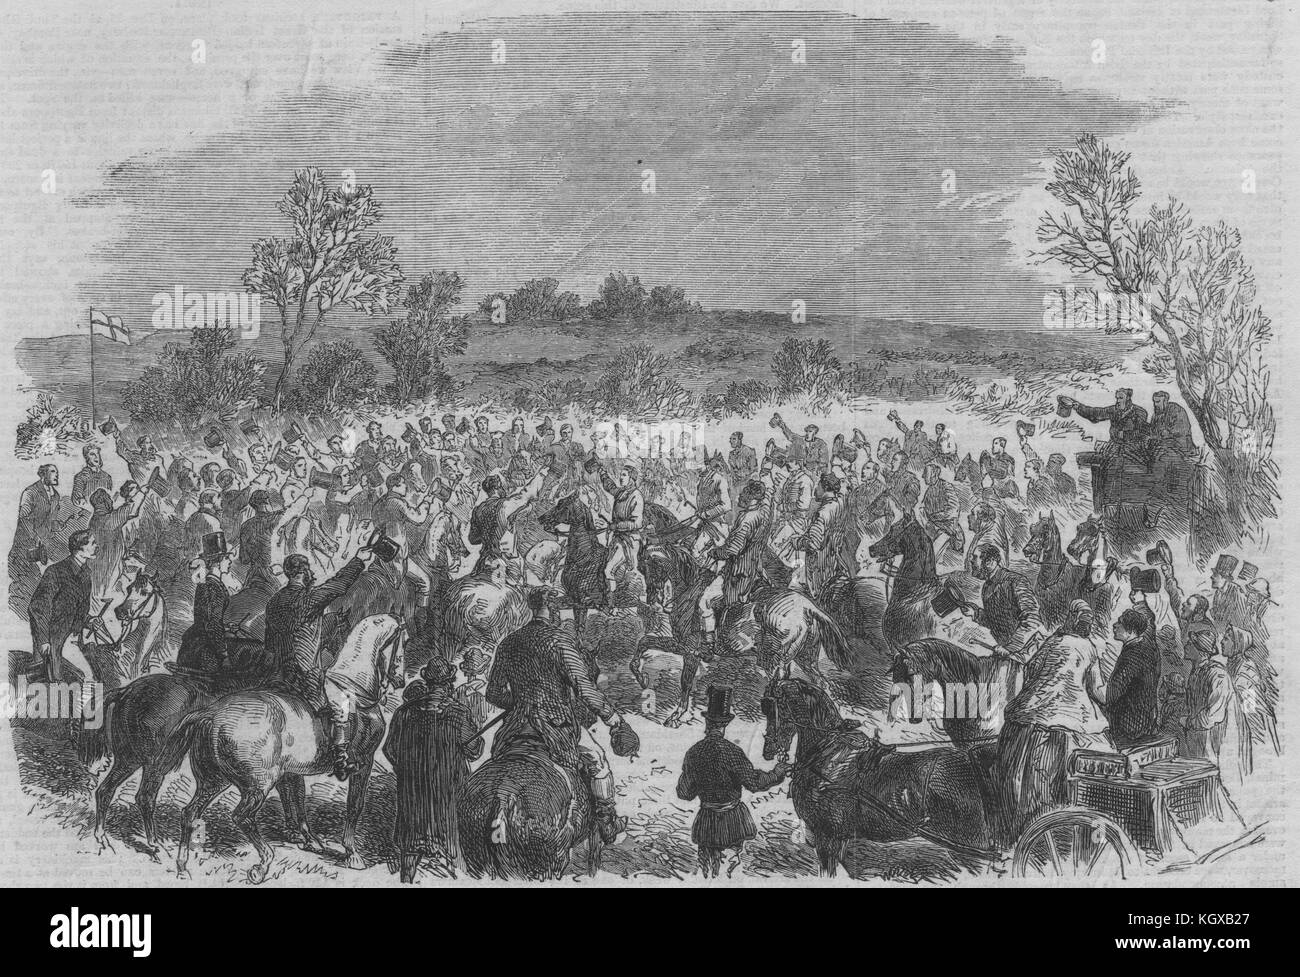 Duke Of Rutland's Foxhounds meet at Piper Hole, Vale of Belvoir. Leics 1866. The Illustrated London News Stock Photo